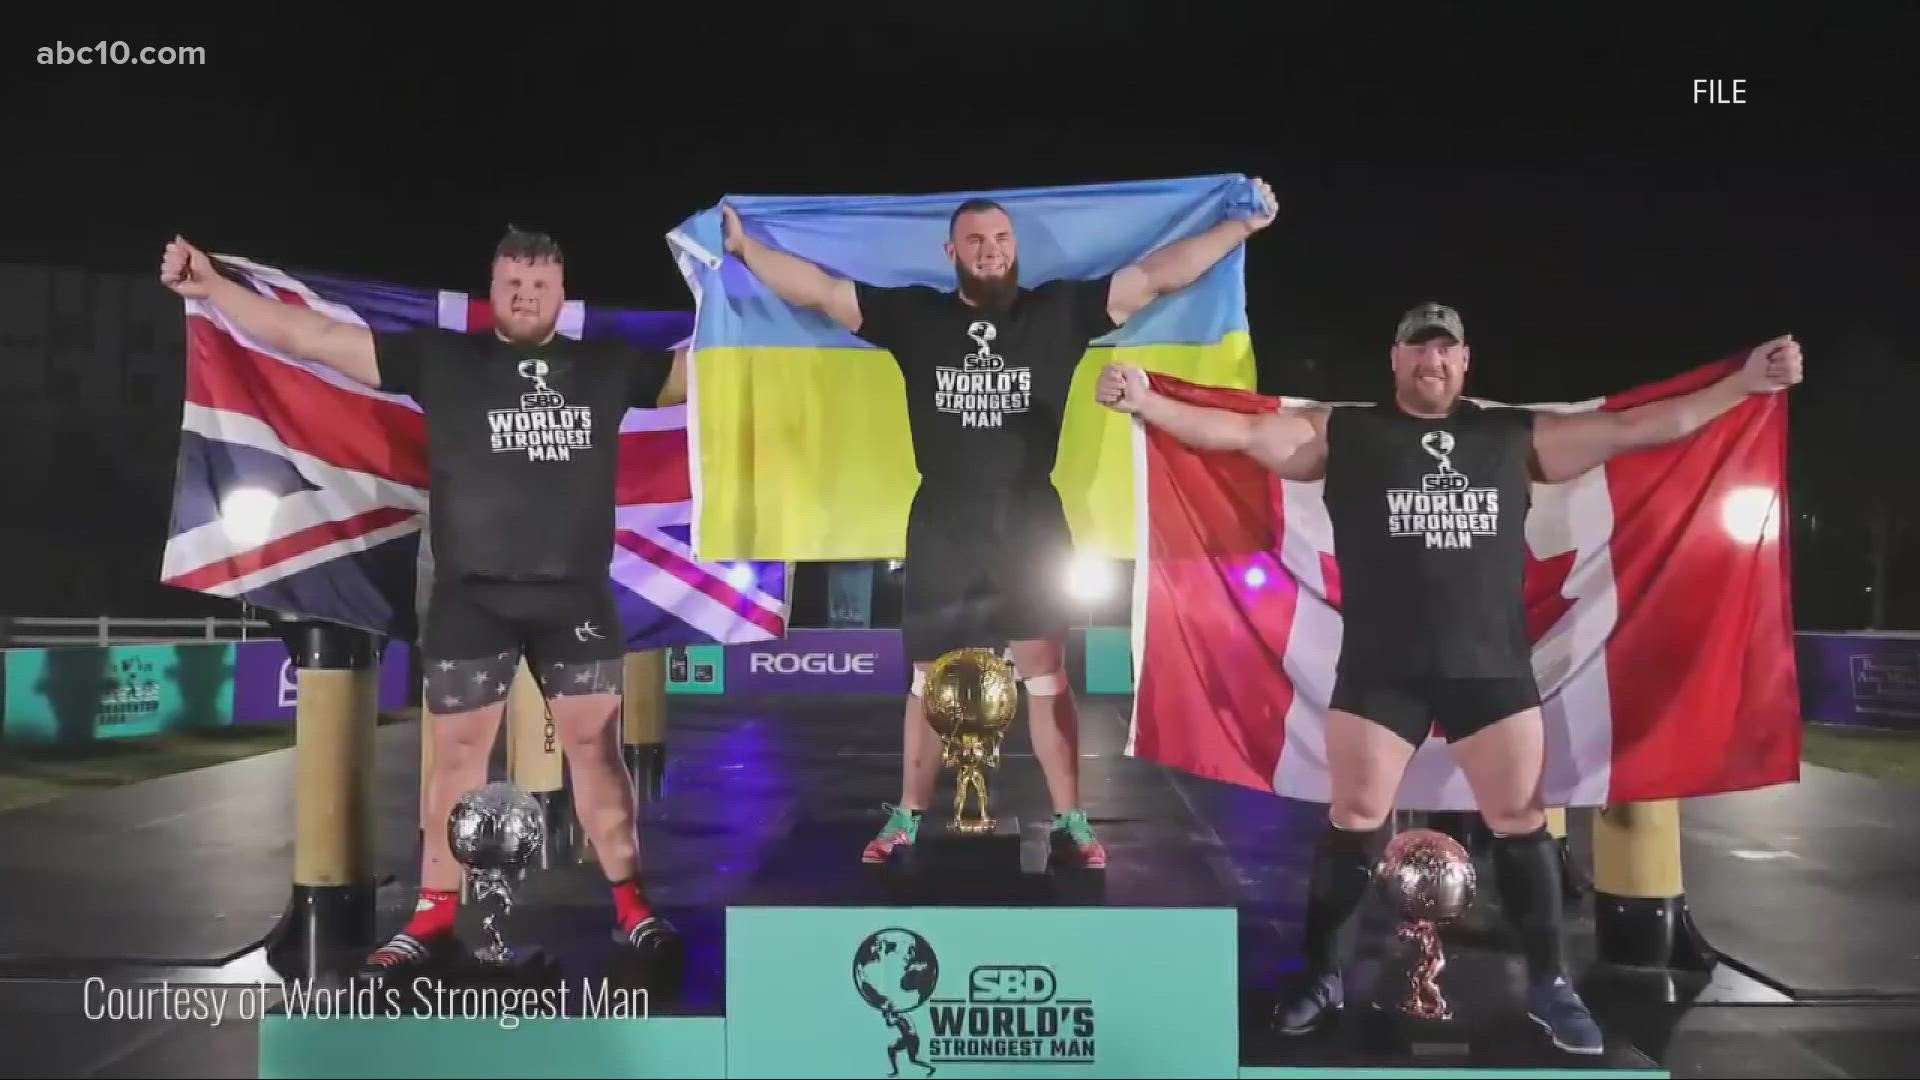 The World's Strongest Man competition and the R&B Sol Blume festival are returning to Sacramento in the spring.